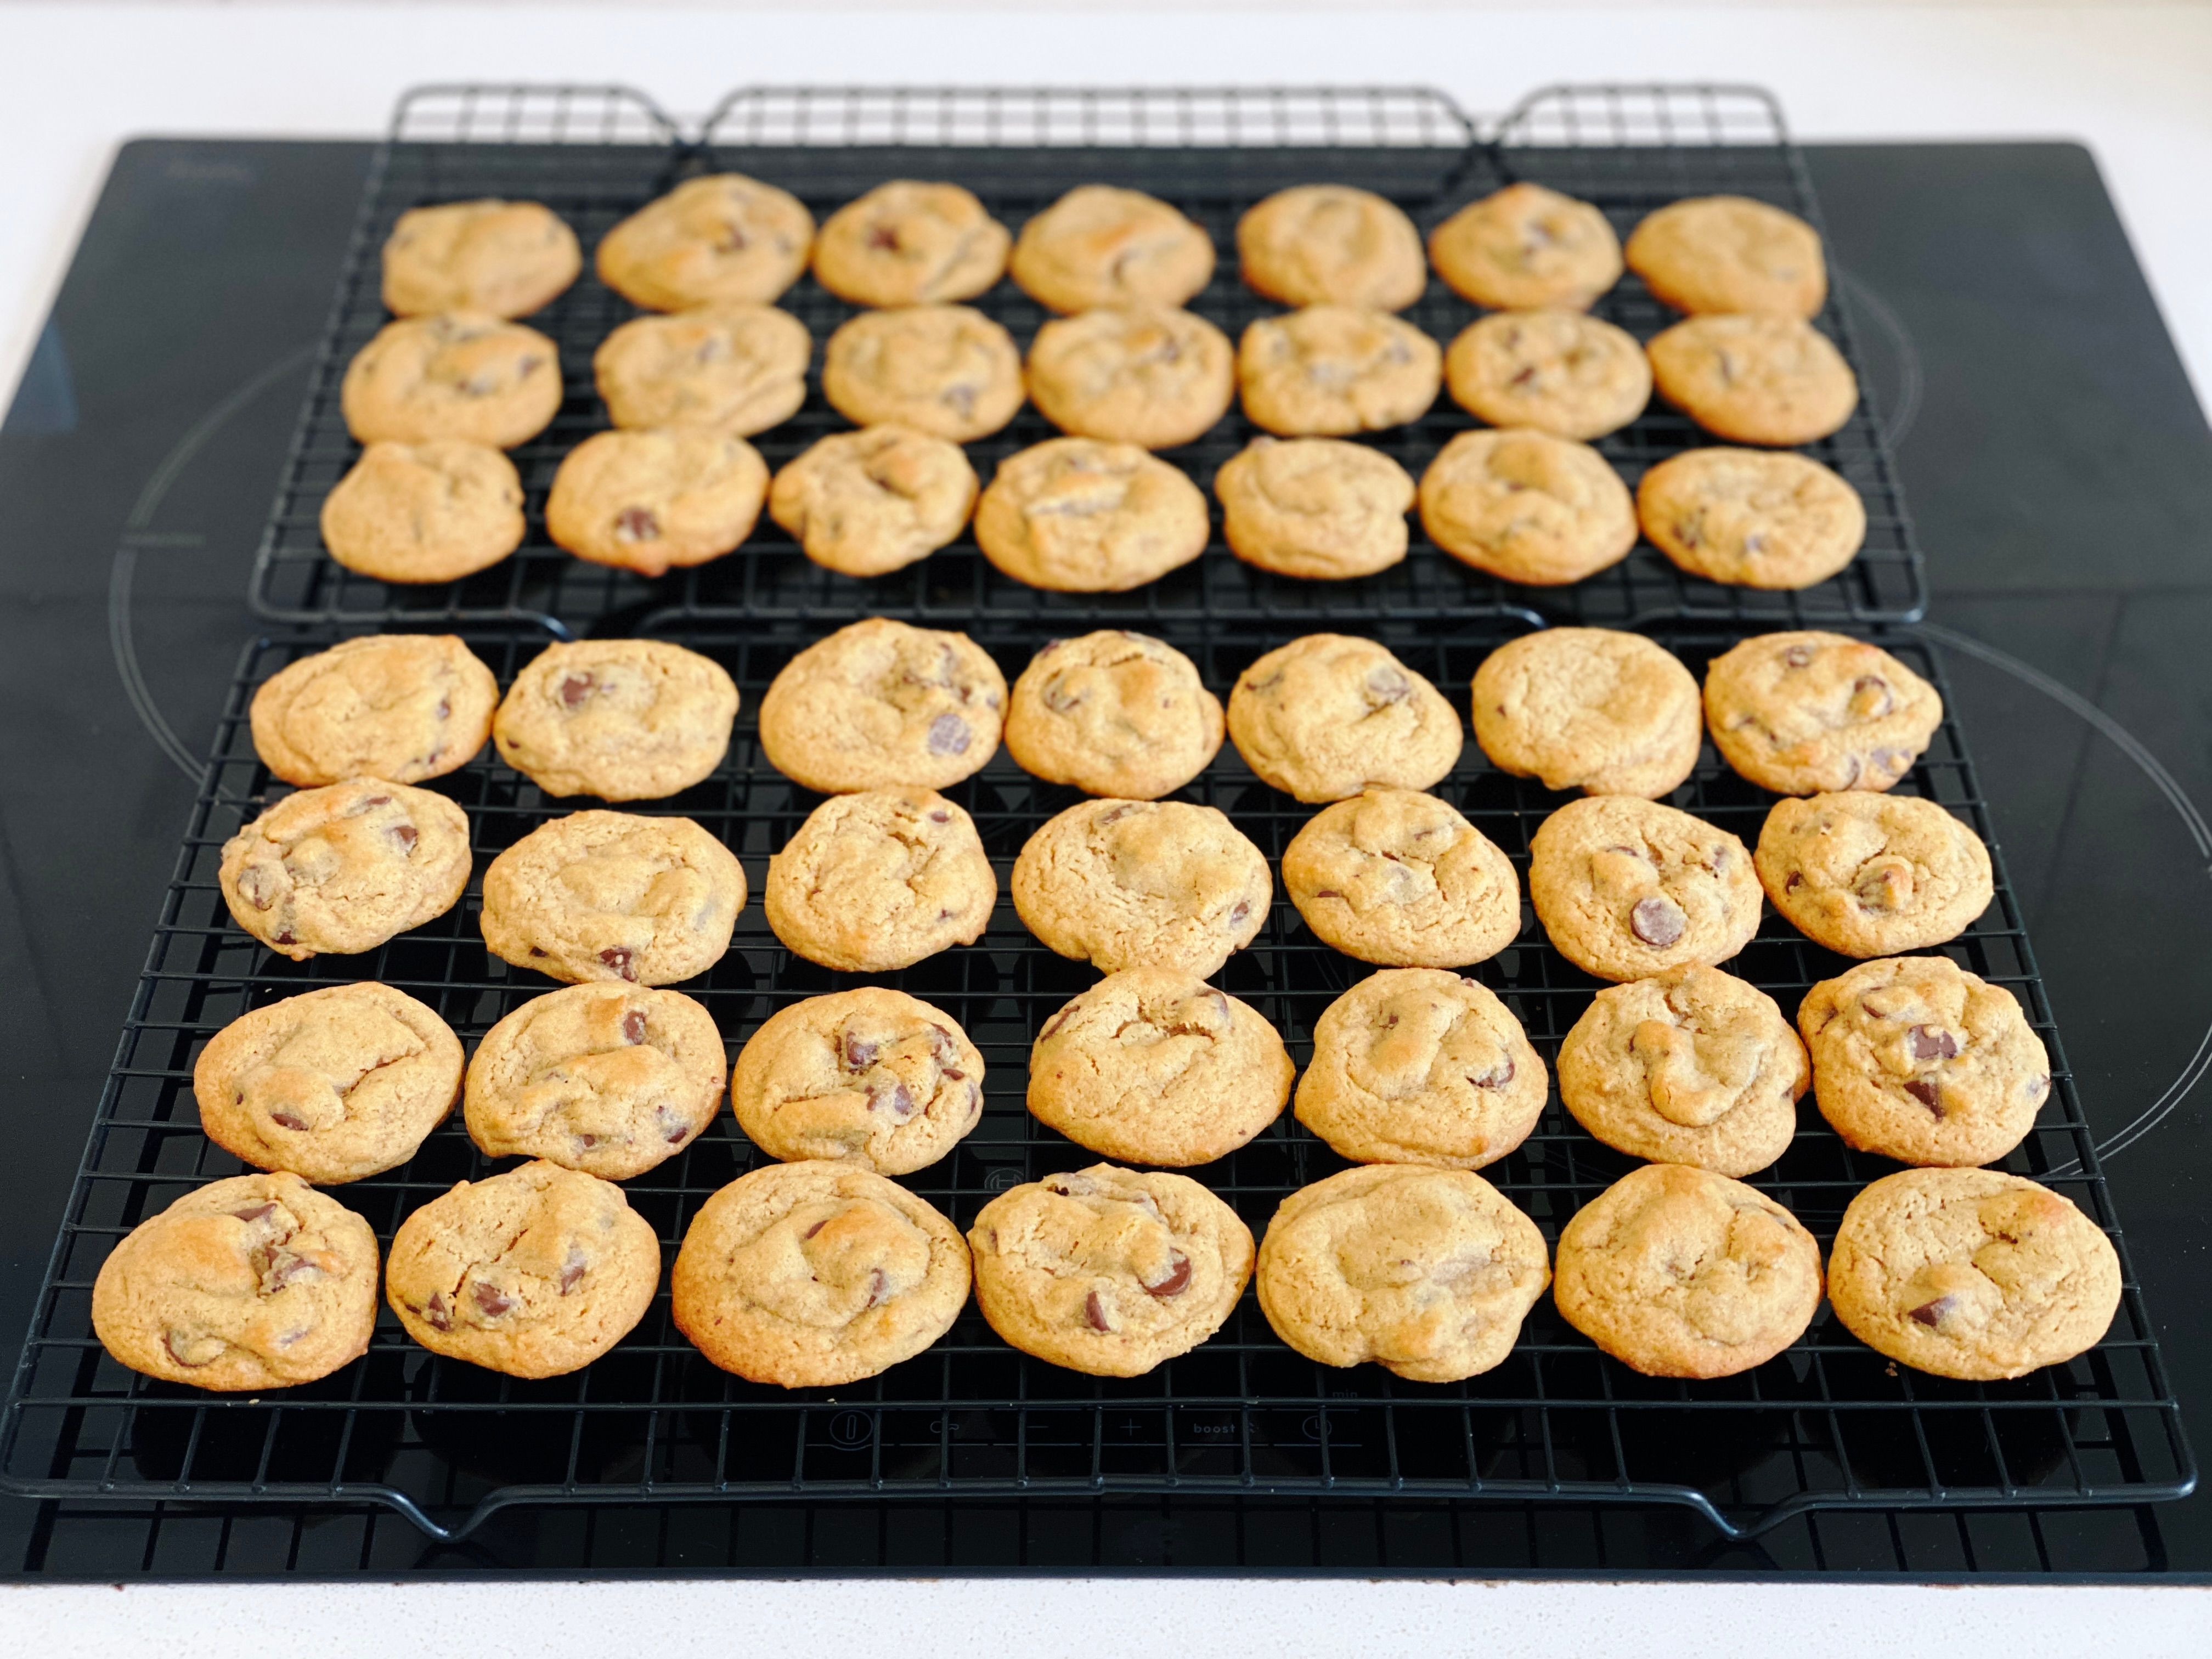 A photo of a bunch (forty-nine if we're being exact) of smallish golden-brown chocolate chip cookies sitting on two cooling racks.